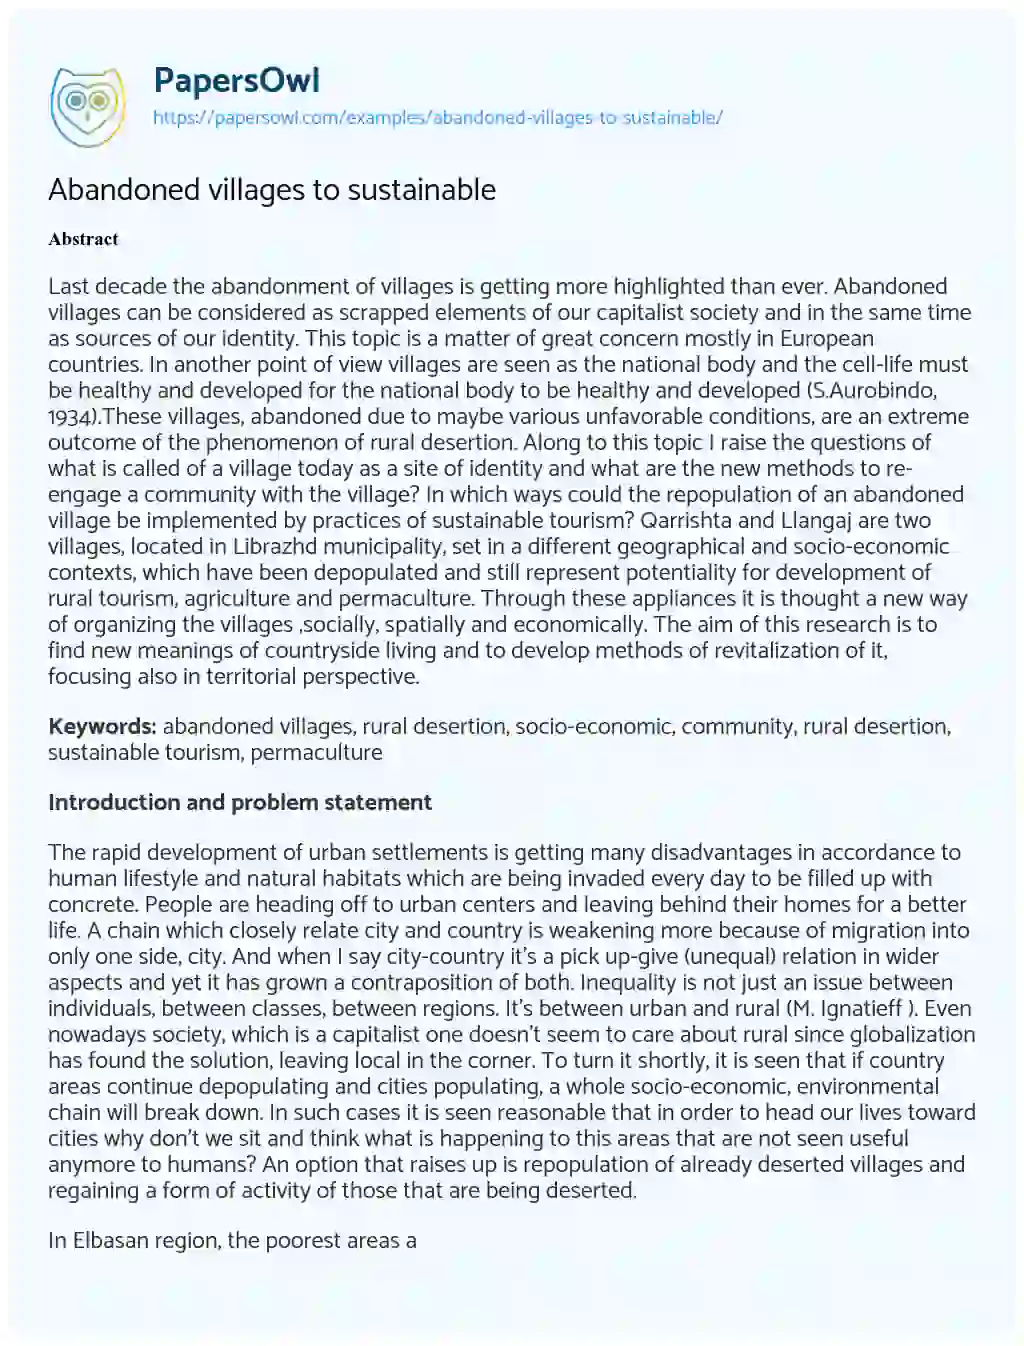 Essay on Abandoned Villages to Sustainable